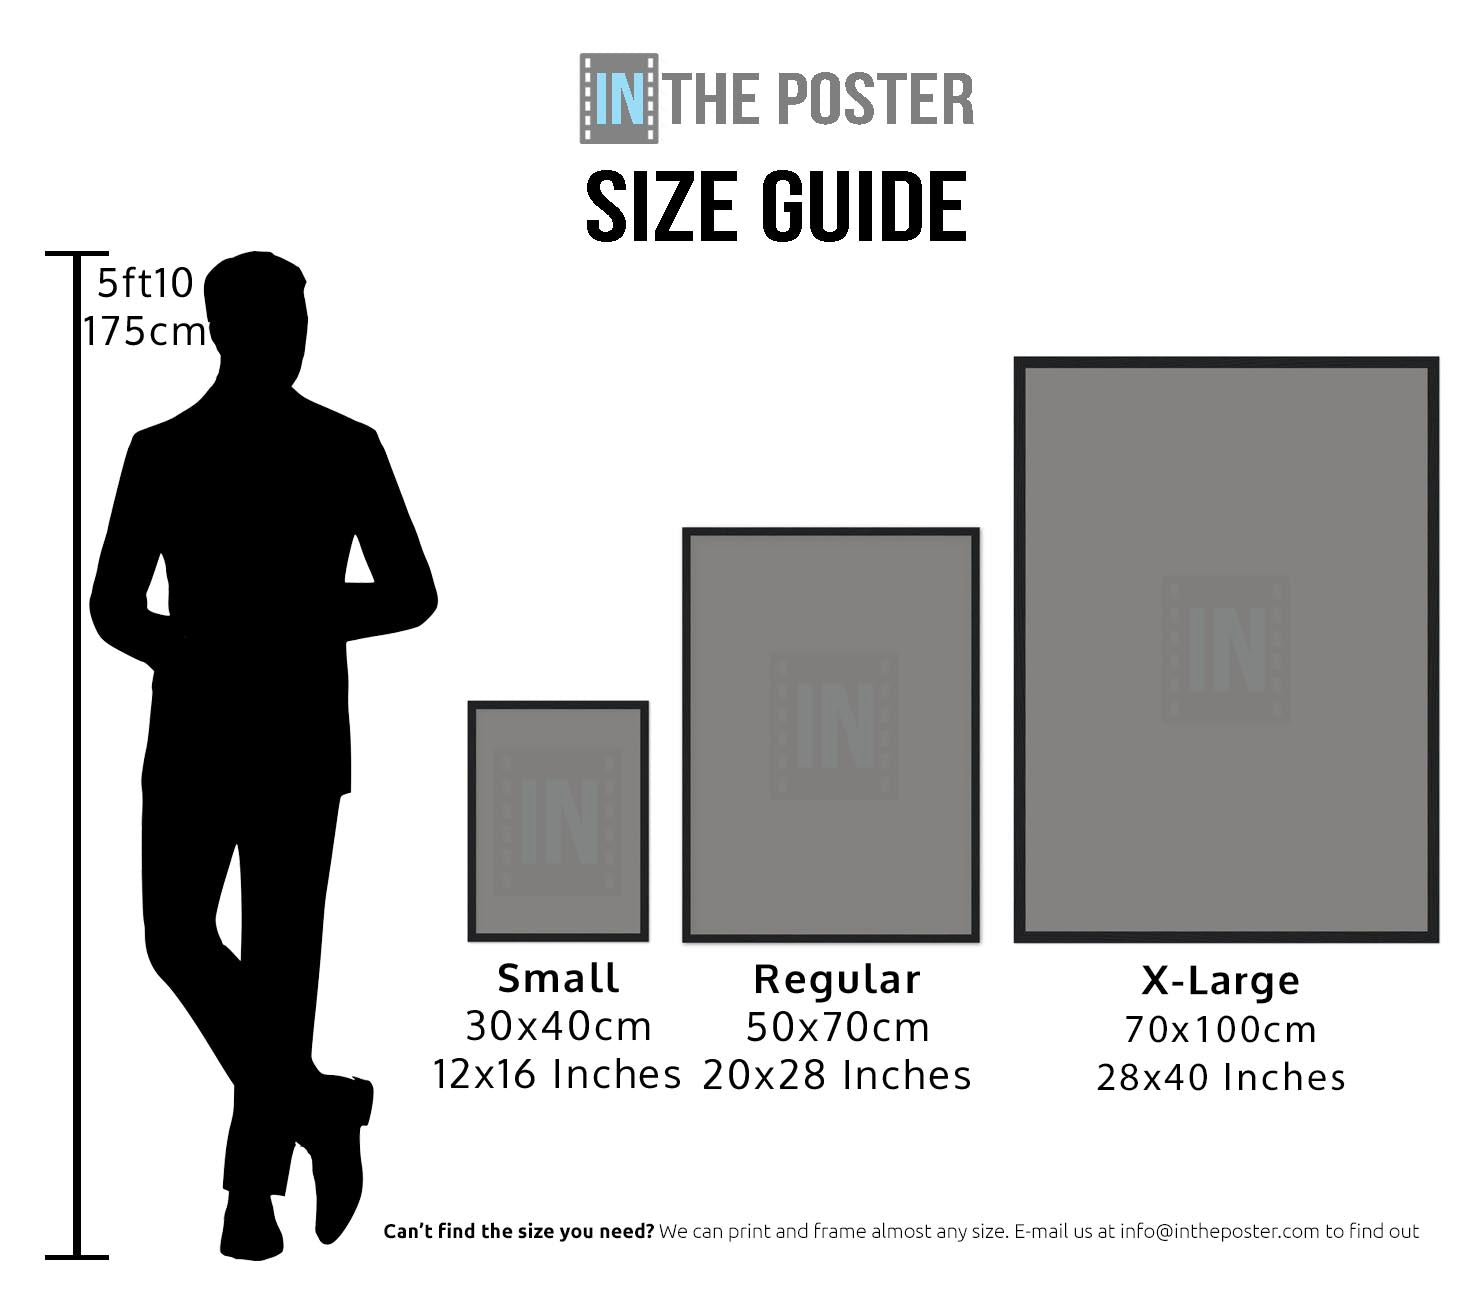 A movie poster size guide, showing the small regular and x-large sizes